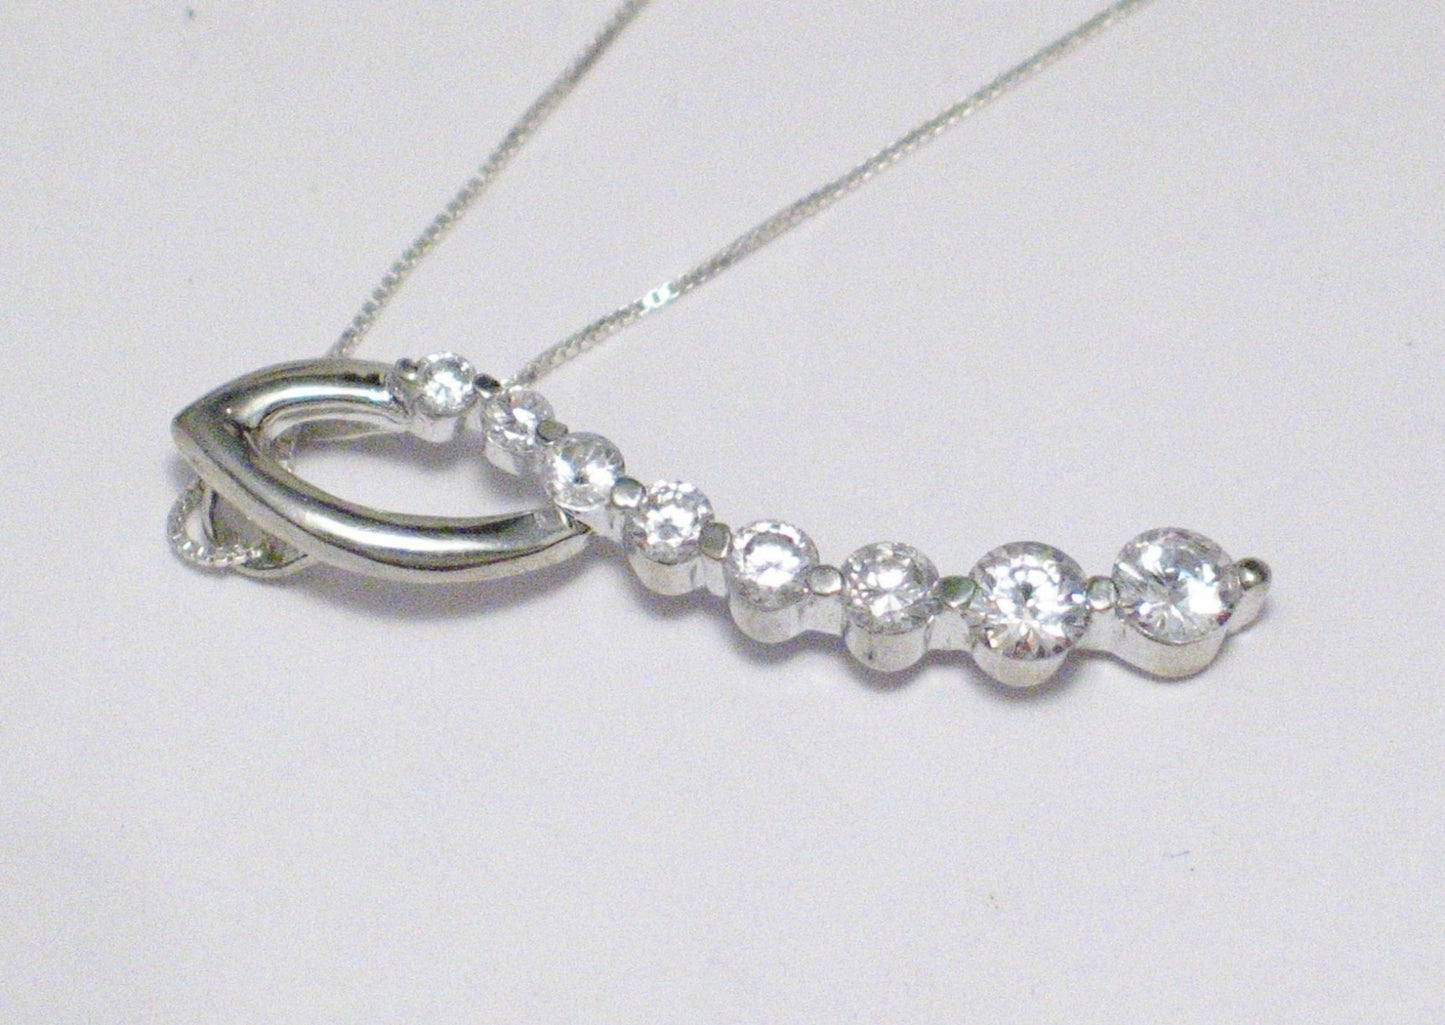 Chain Necklace Pendant Set Sterling Silver Box Link Cz Gemstone Charm 18" - Blingschlingers Jewelry